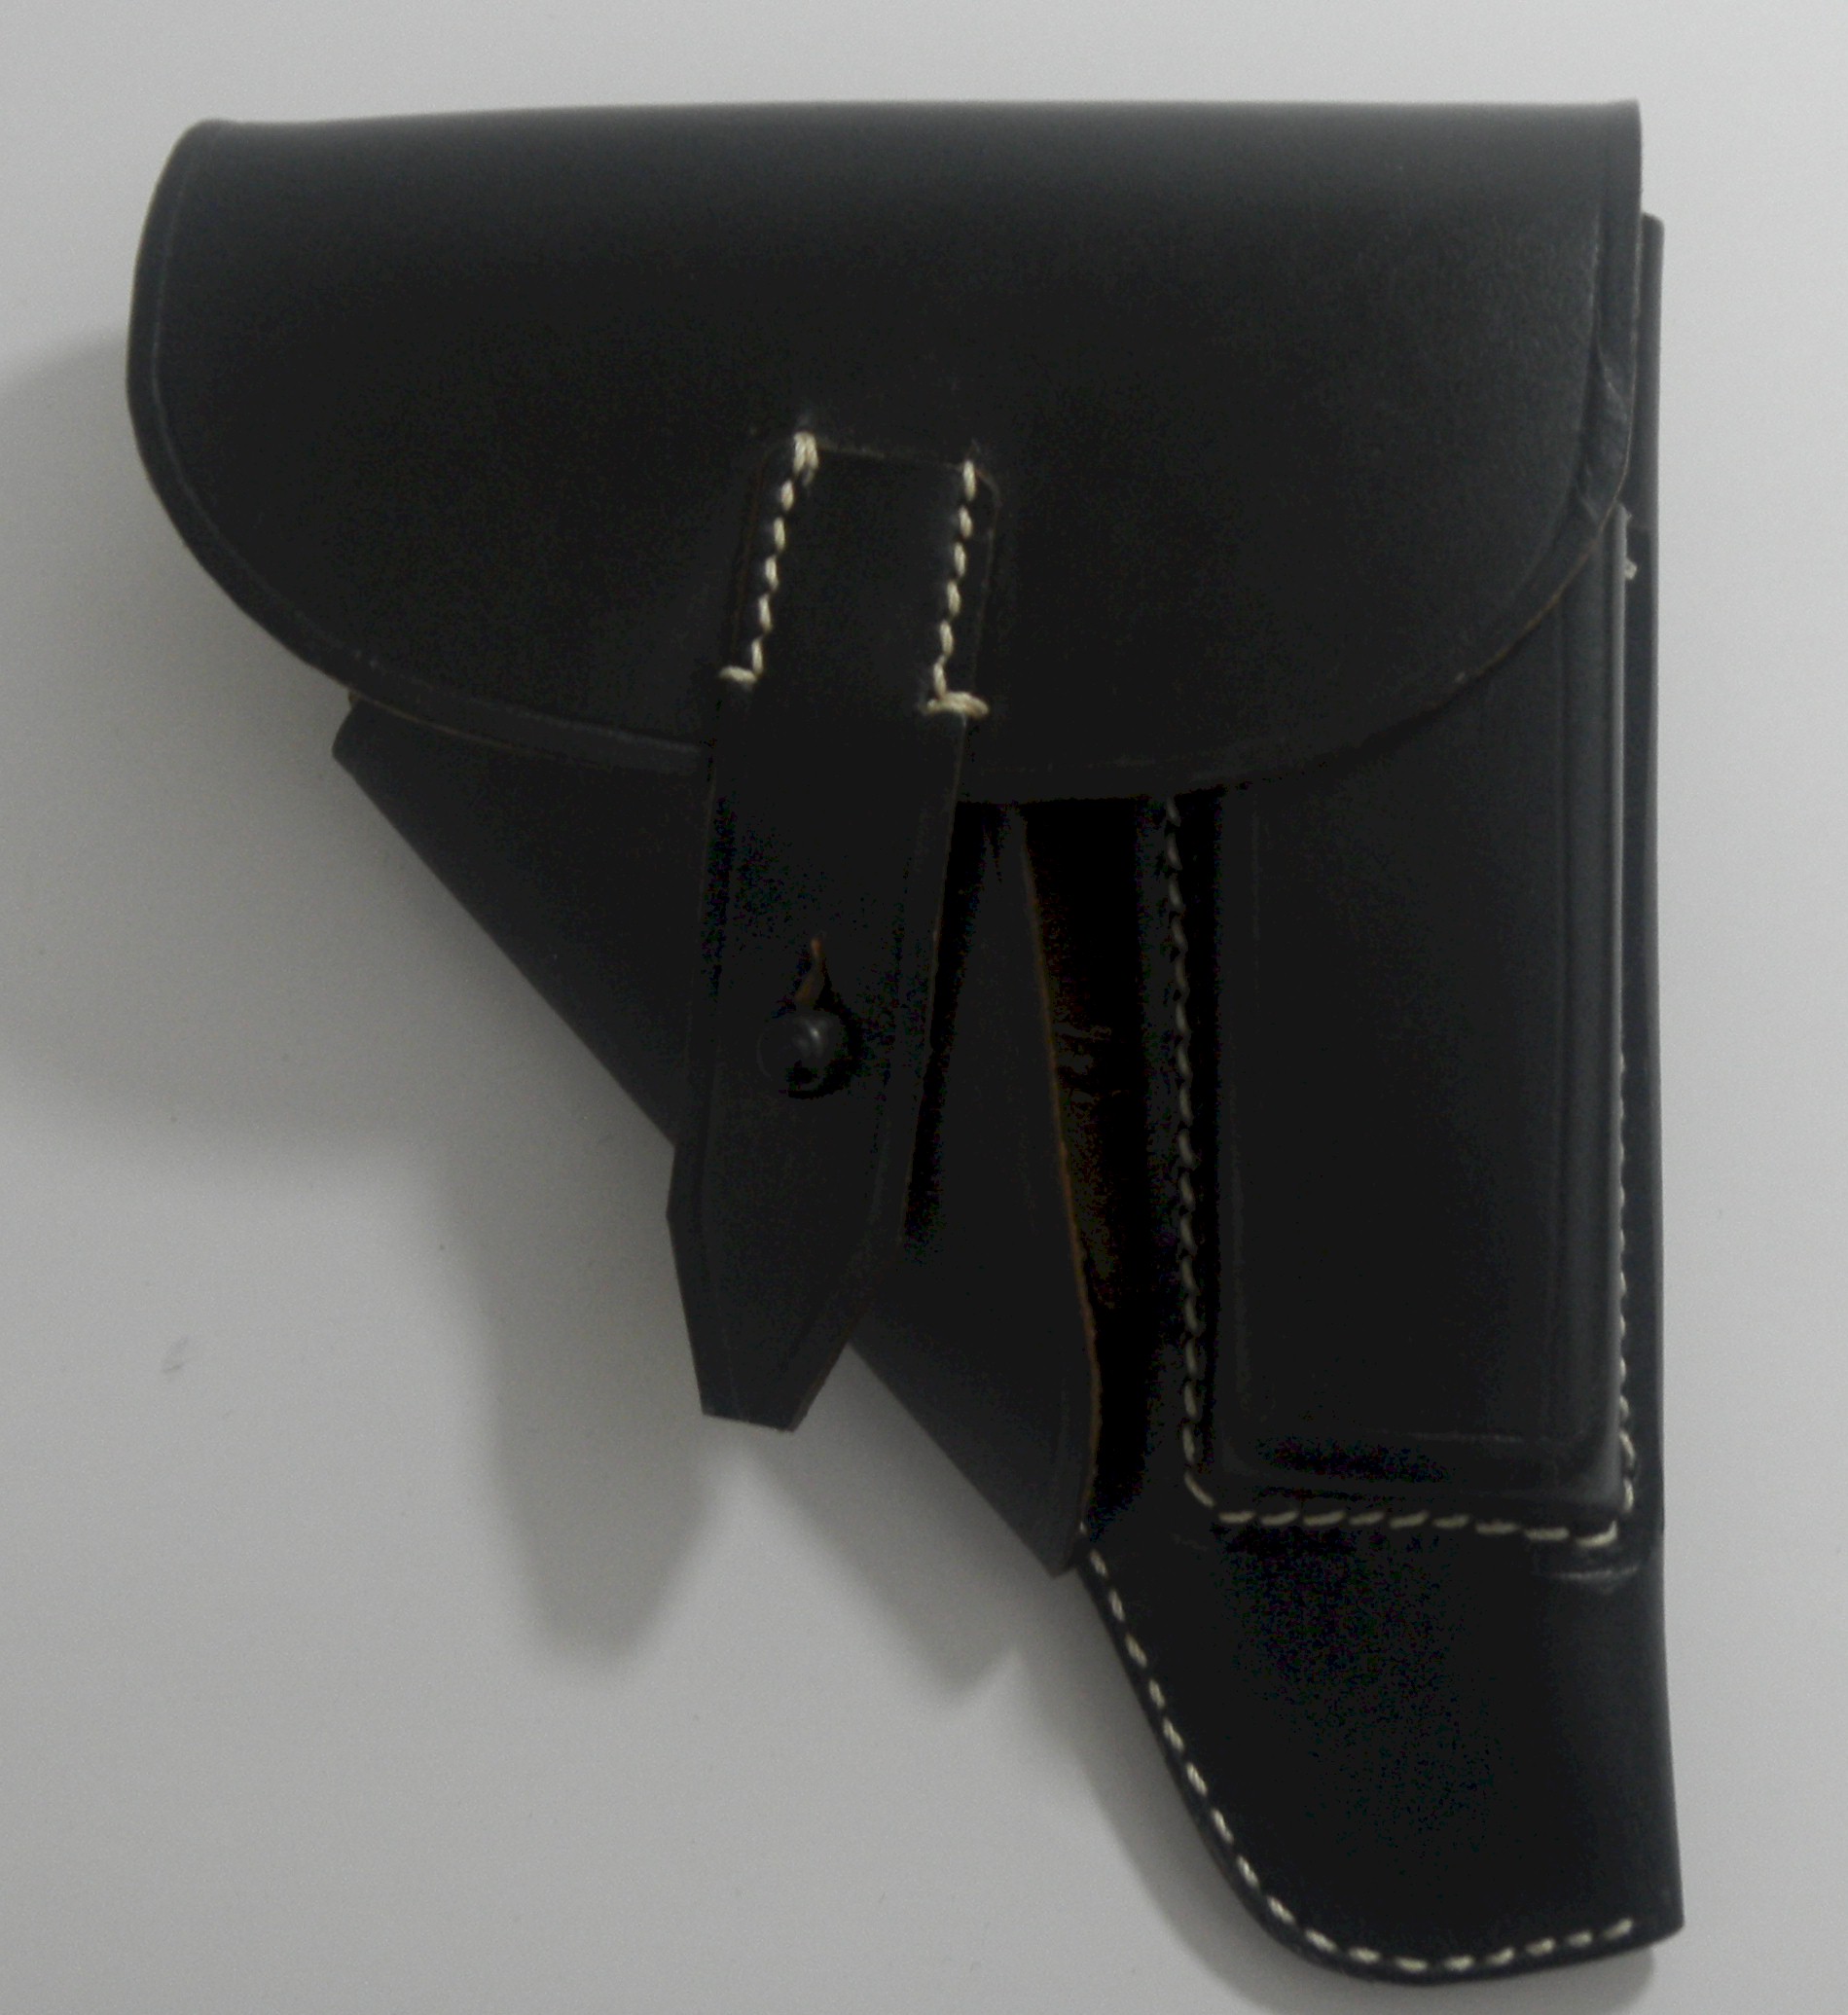 GERMAN HOLSTER FOR WALTHER PPK BLACK LEATHER